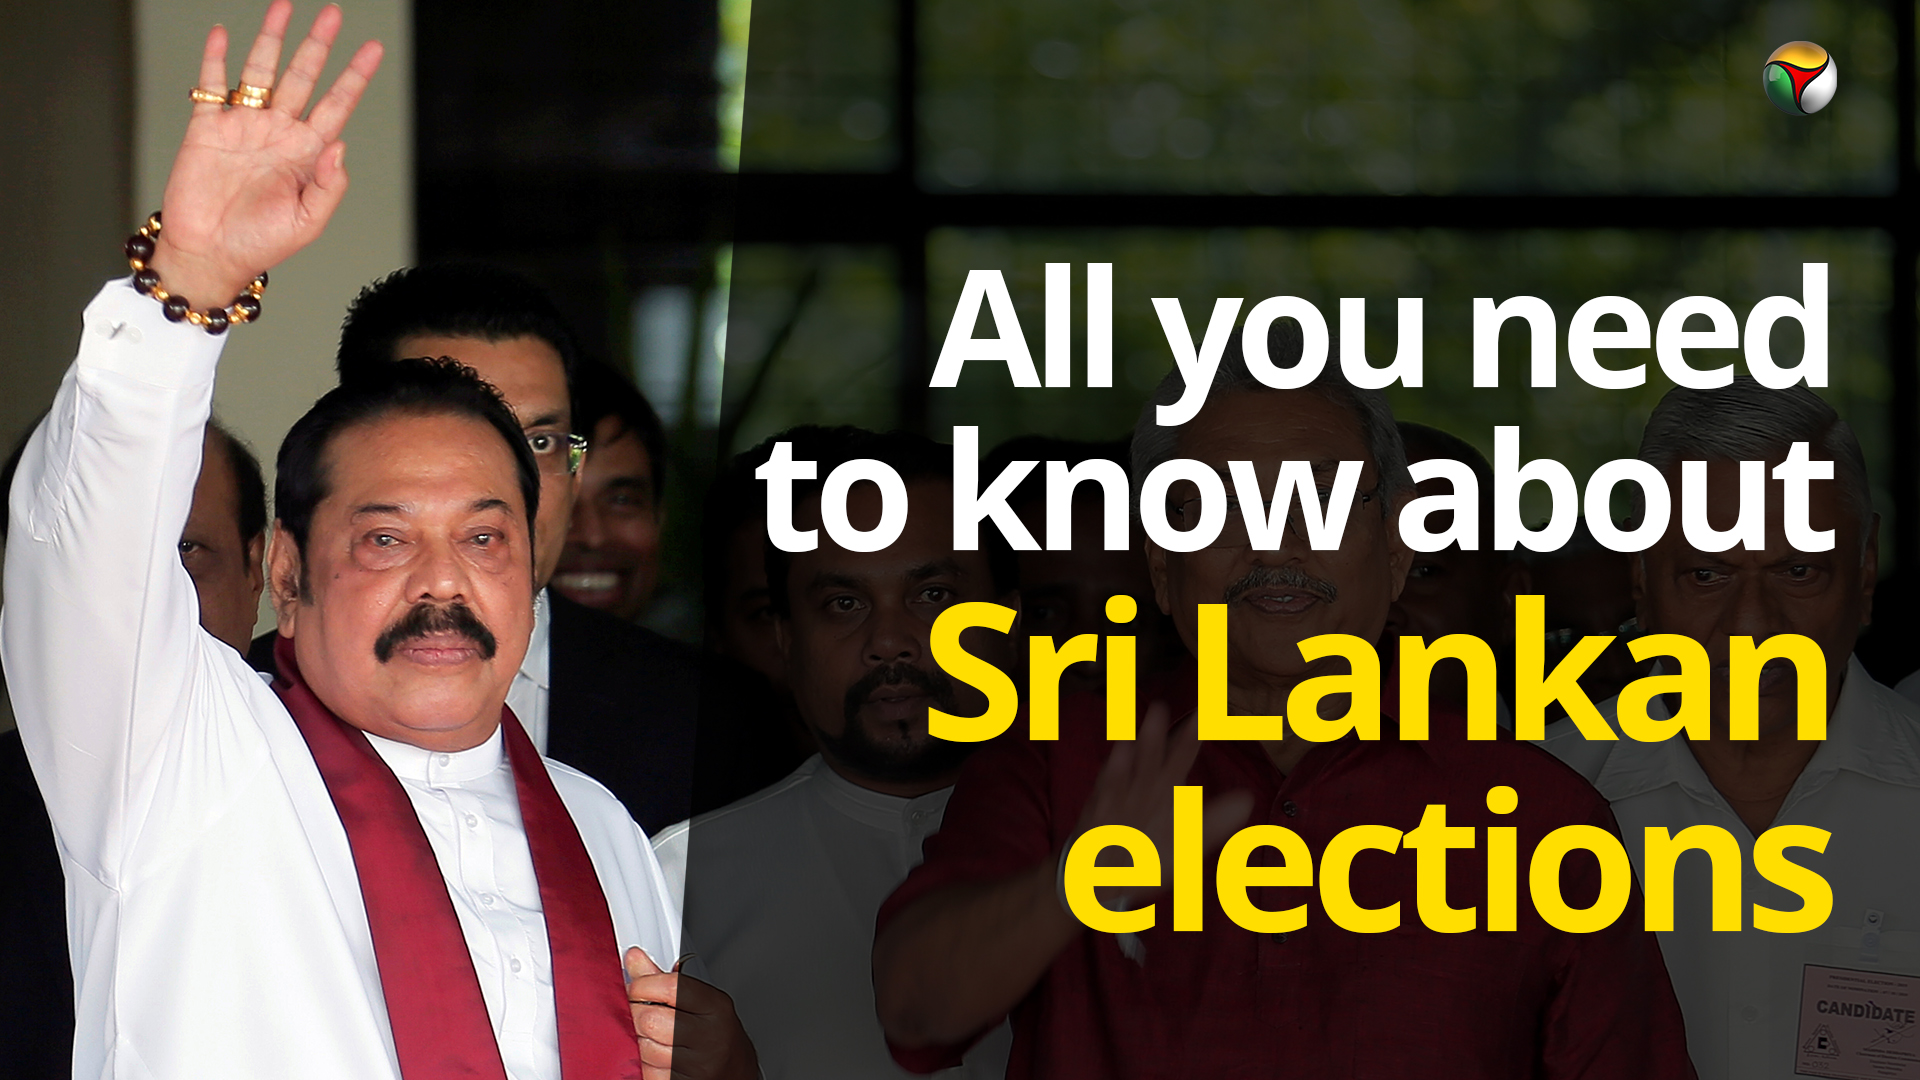 All you need to know about the Sri Lankan elections